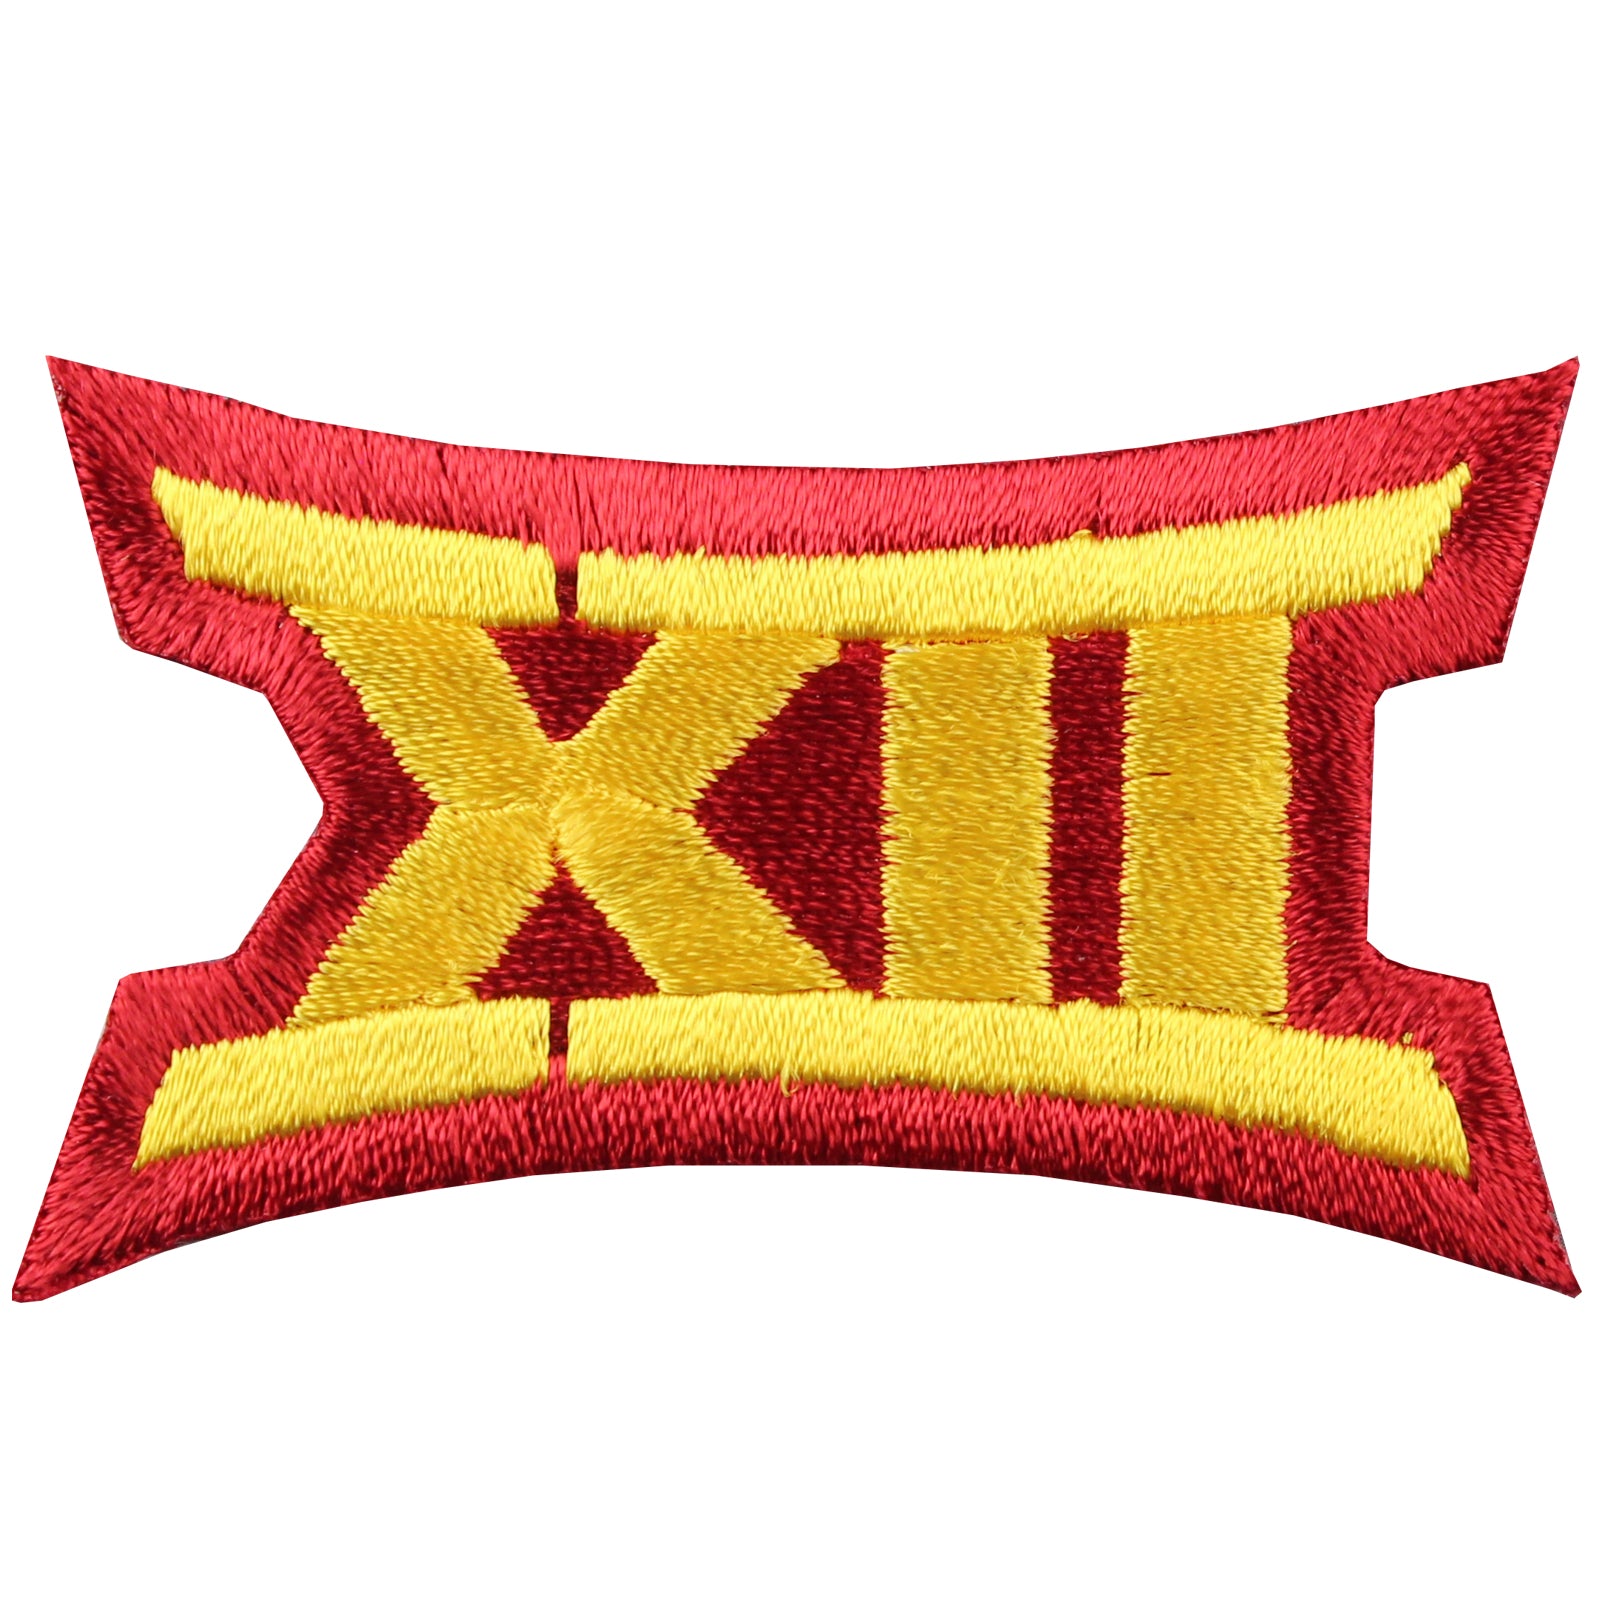 Big 12 XII Conference Team Jersey Uniform Patch Iowa State Cyclones 